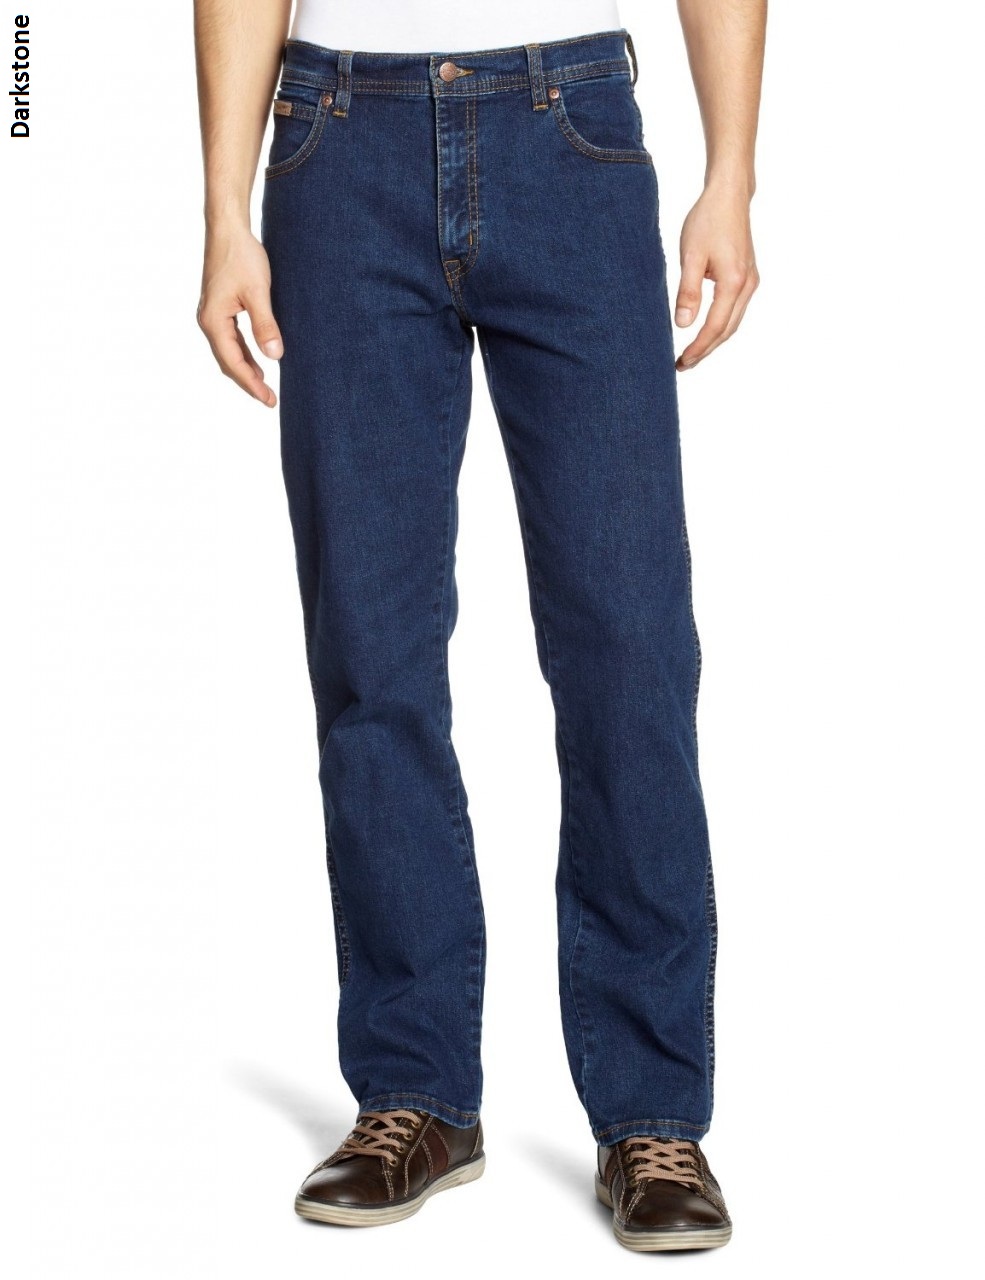 The wrangler jeans texas stretch new york and company